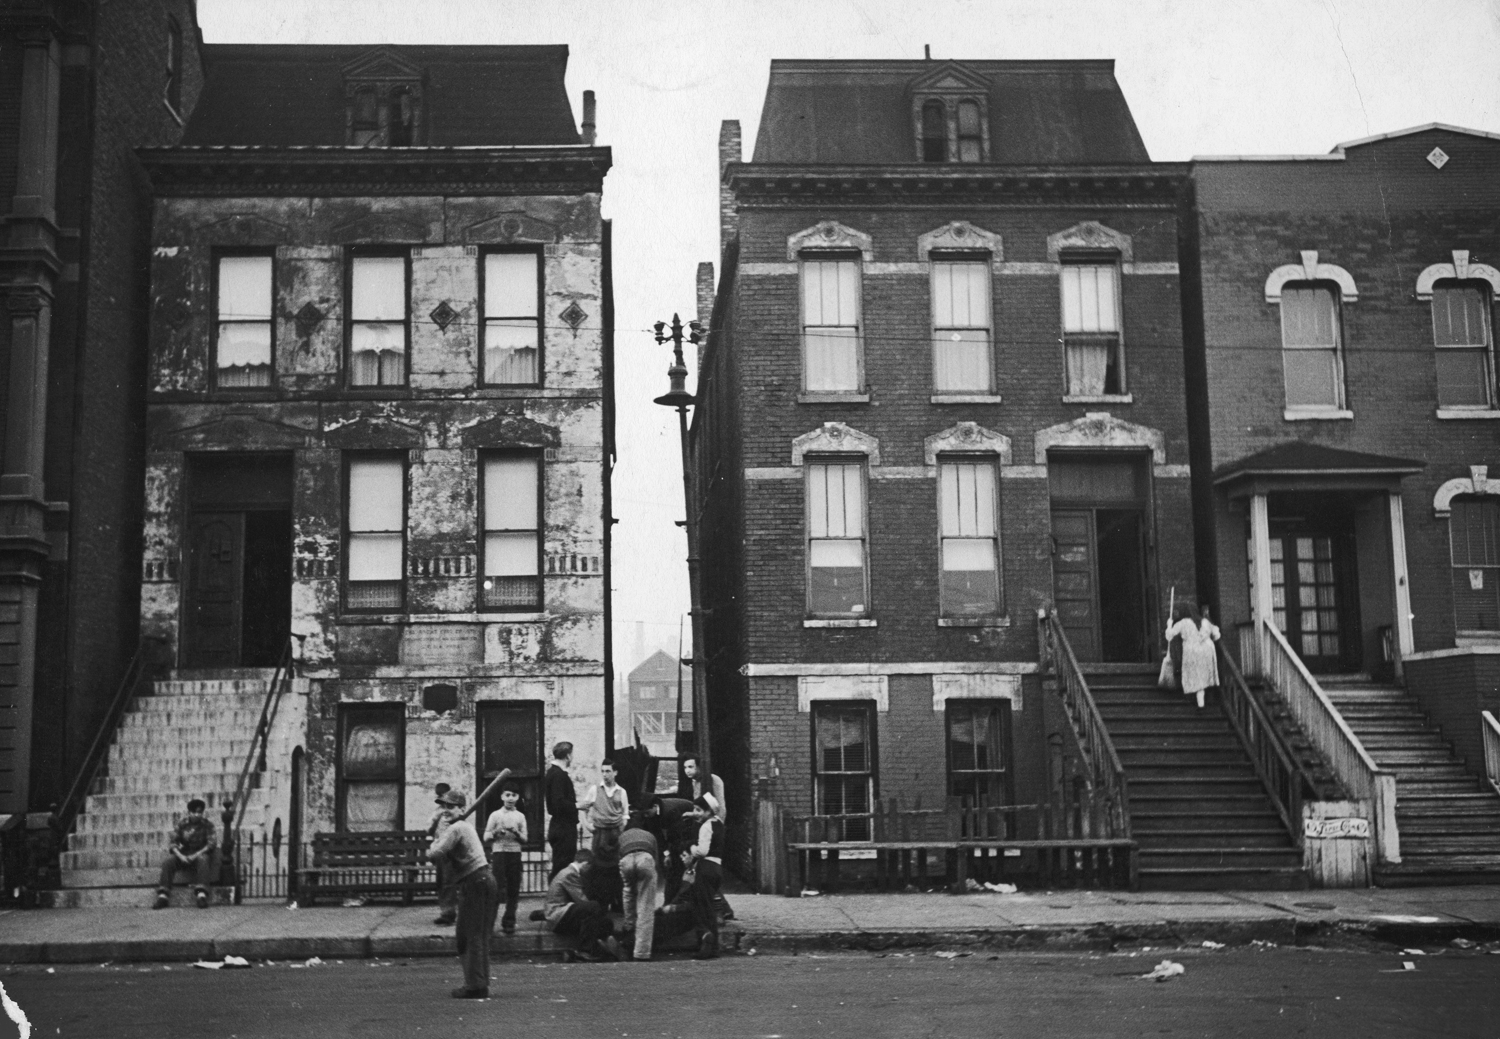 Tenement, West Side of Chicago, 1944.